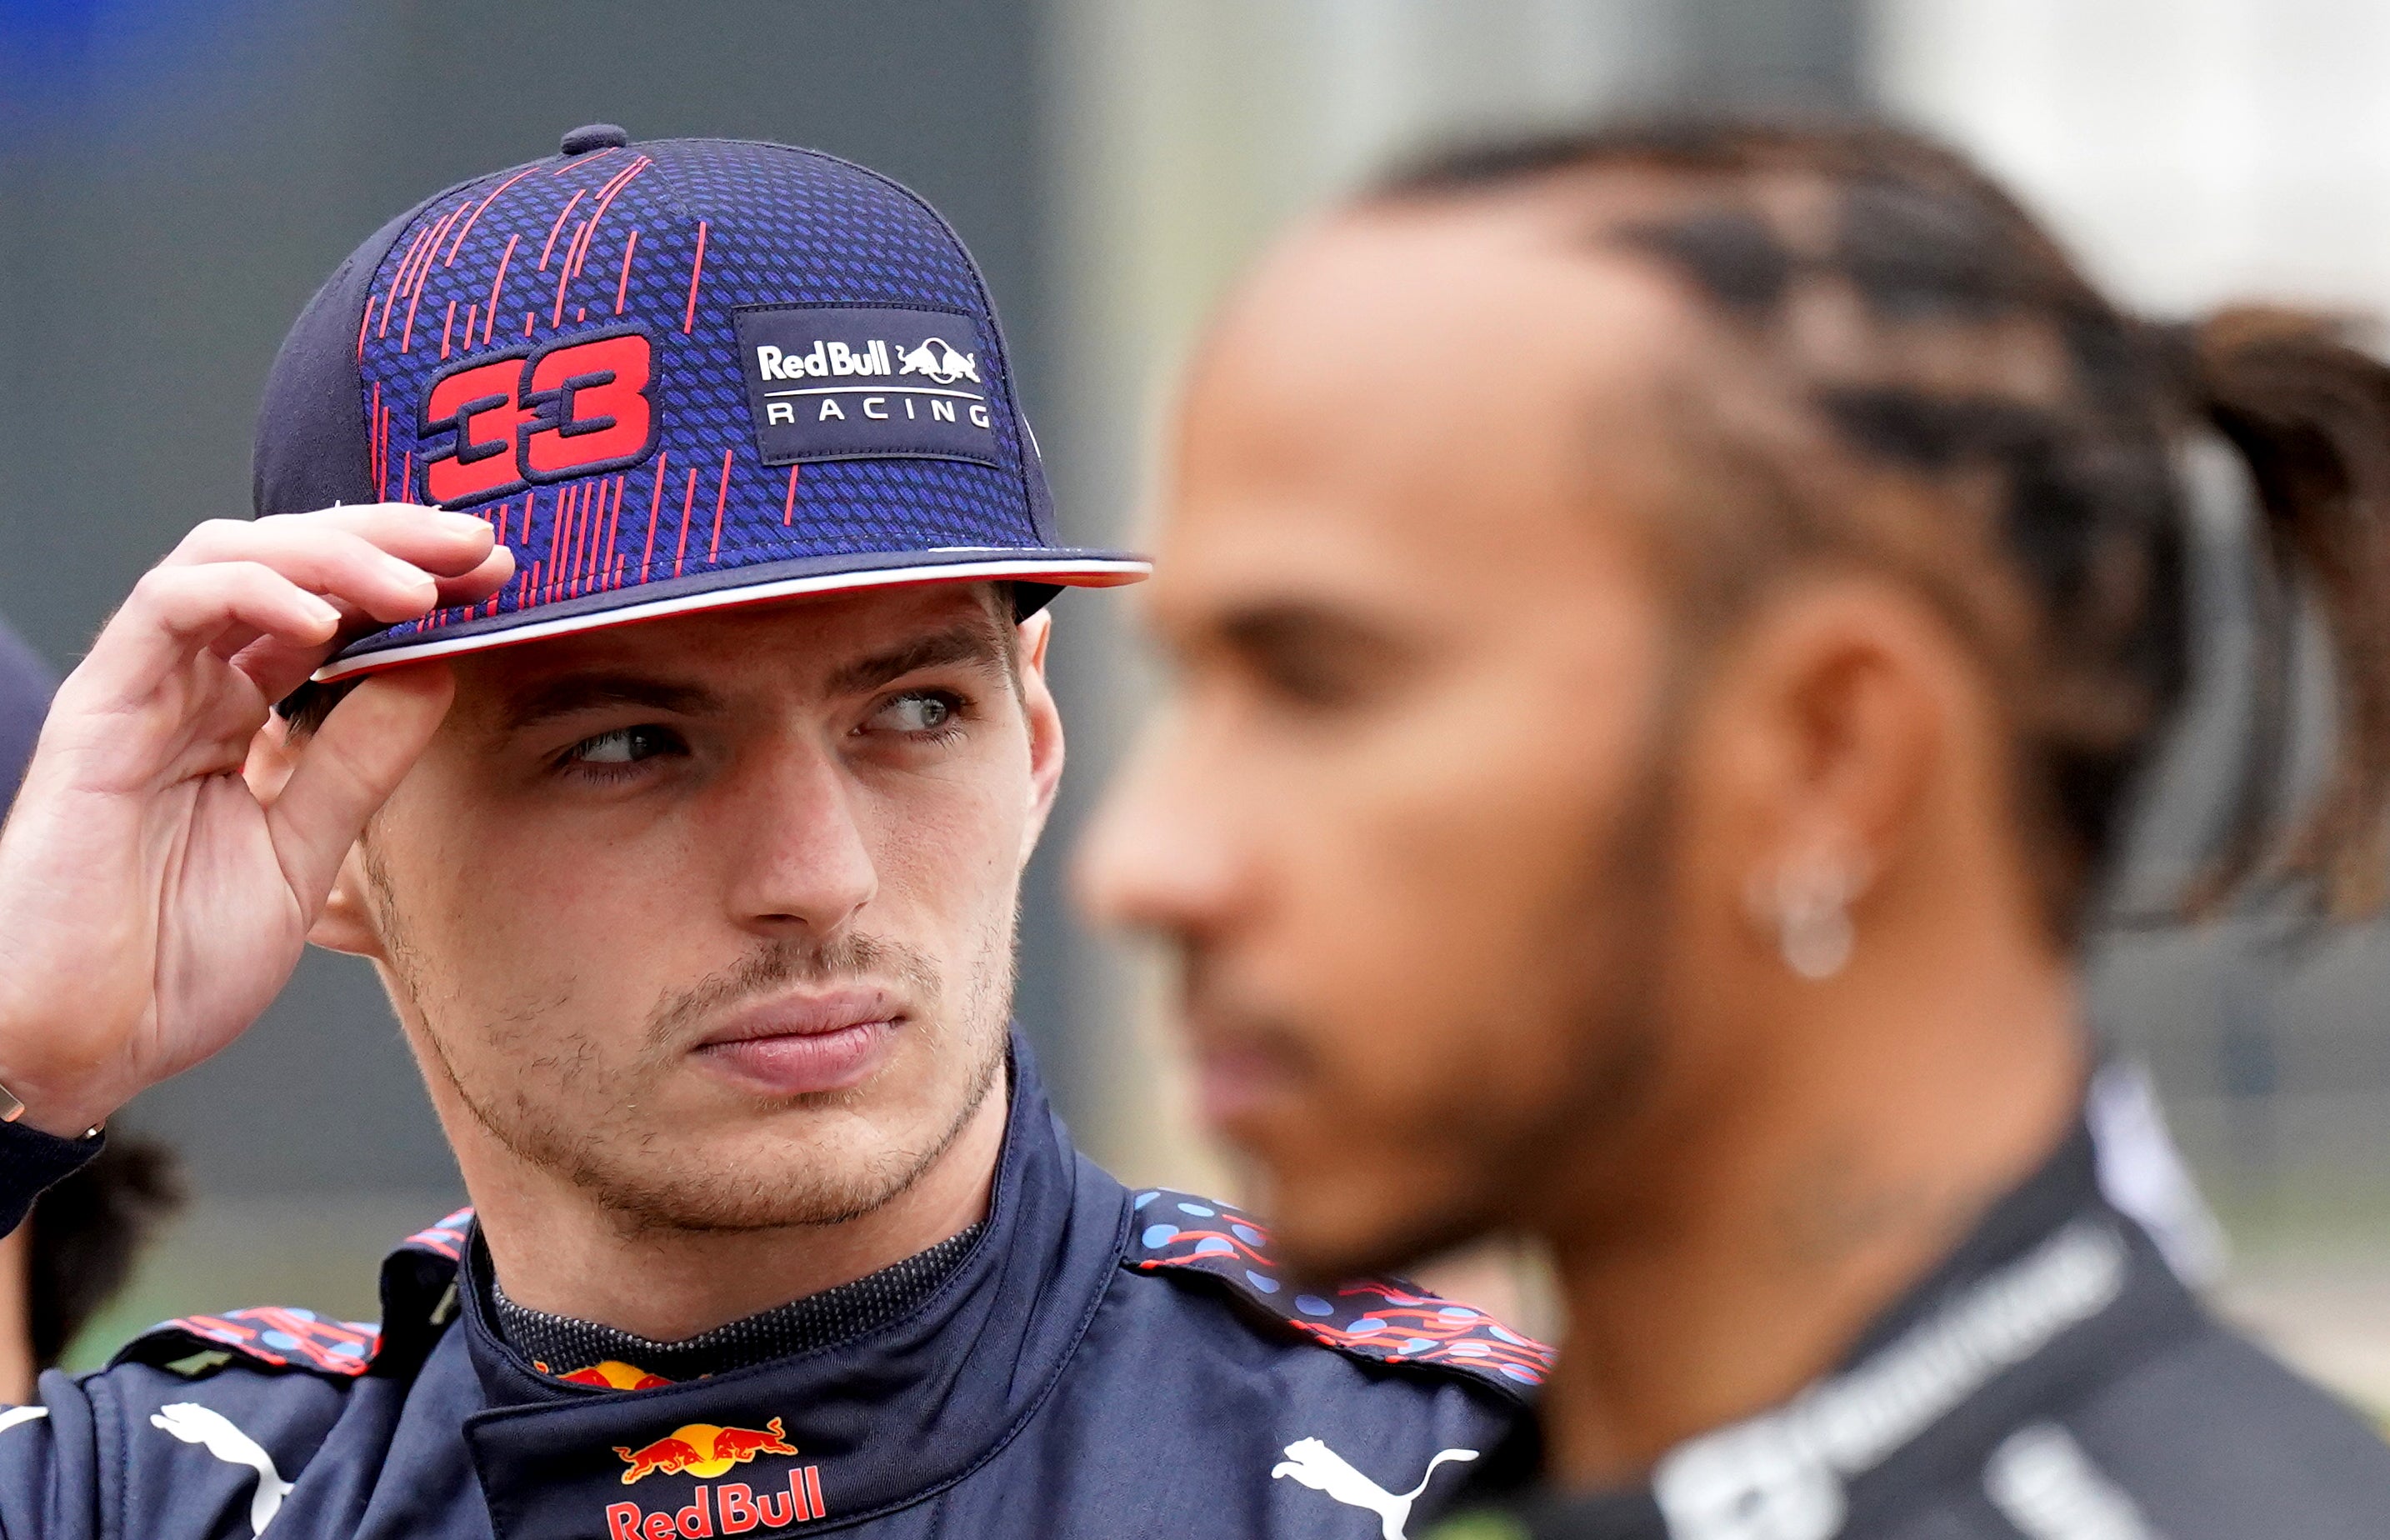 Max Verstappen and Lewis Hamilton are battling for the F1 title (PA)